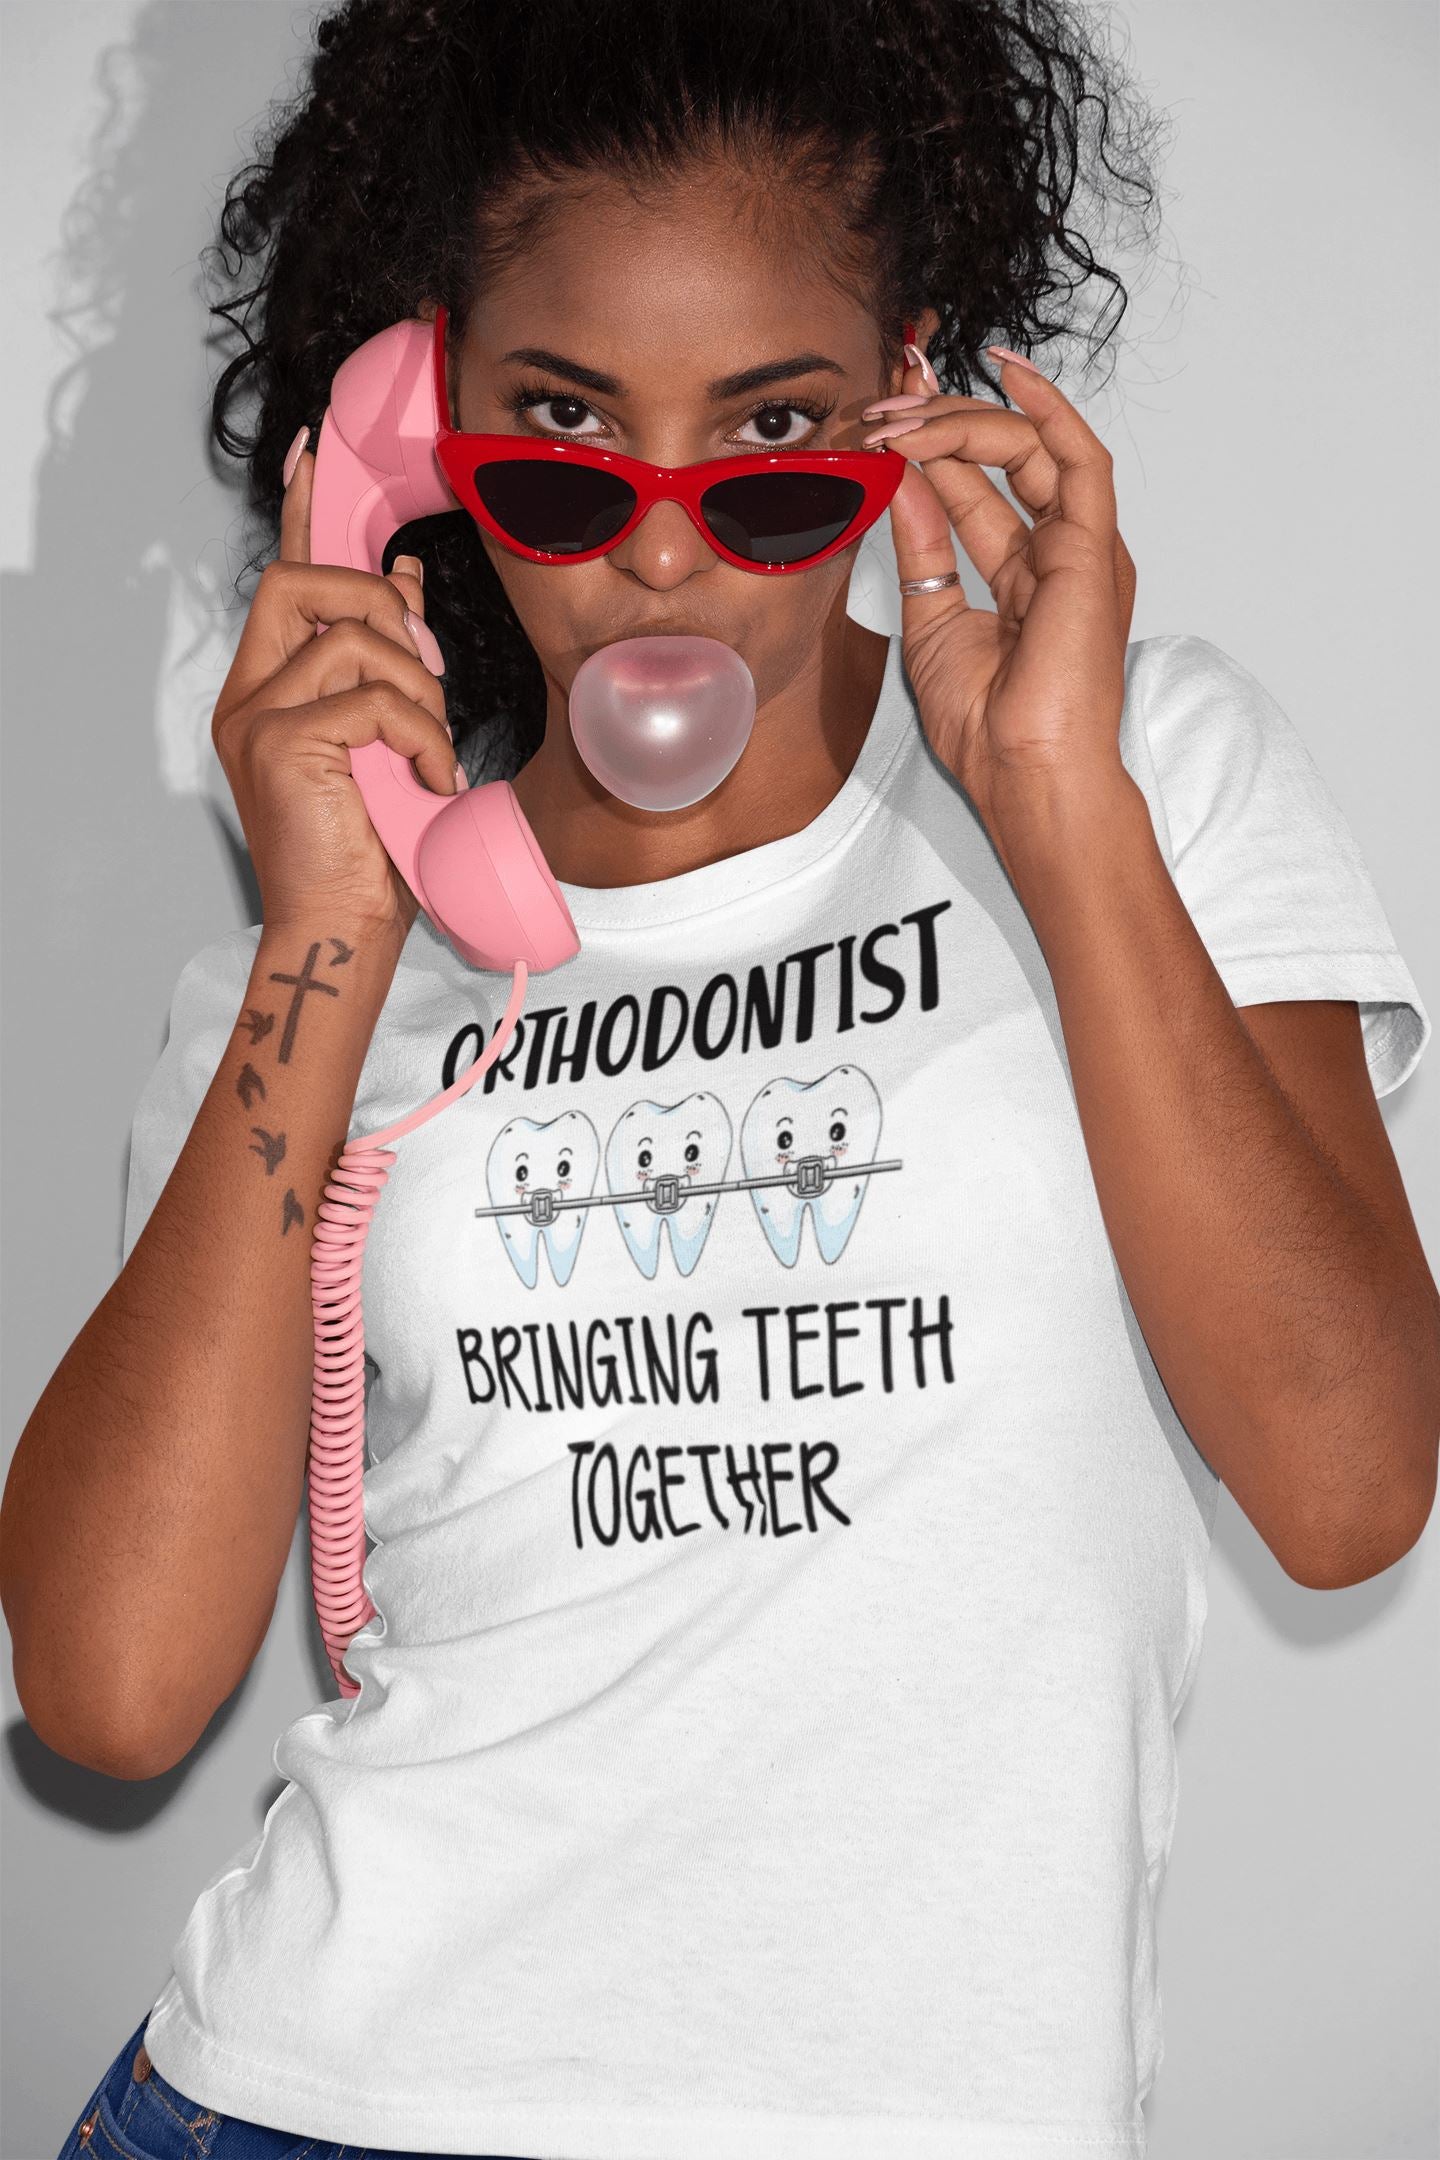 Orthodontist Bringing Teeth Together Special T Shirt for Men and Women Dentists - Catch My Drift India  black, clothing, dentist, doctor, made in india, orthodontist, shirt, t shirt, tshirt